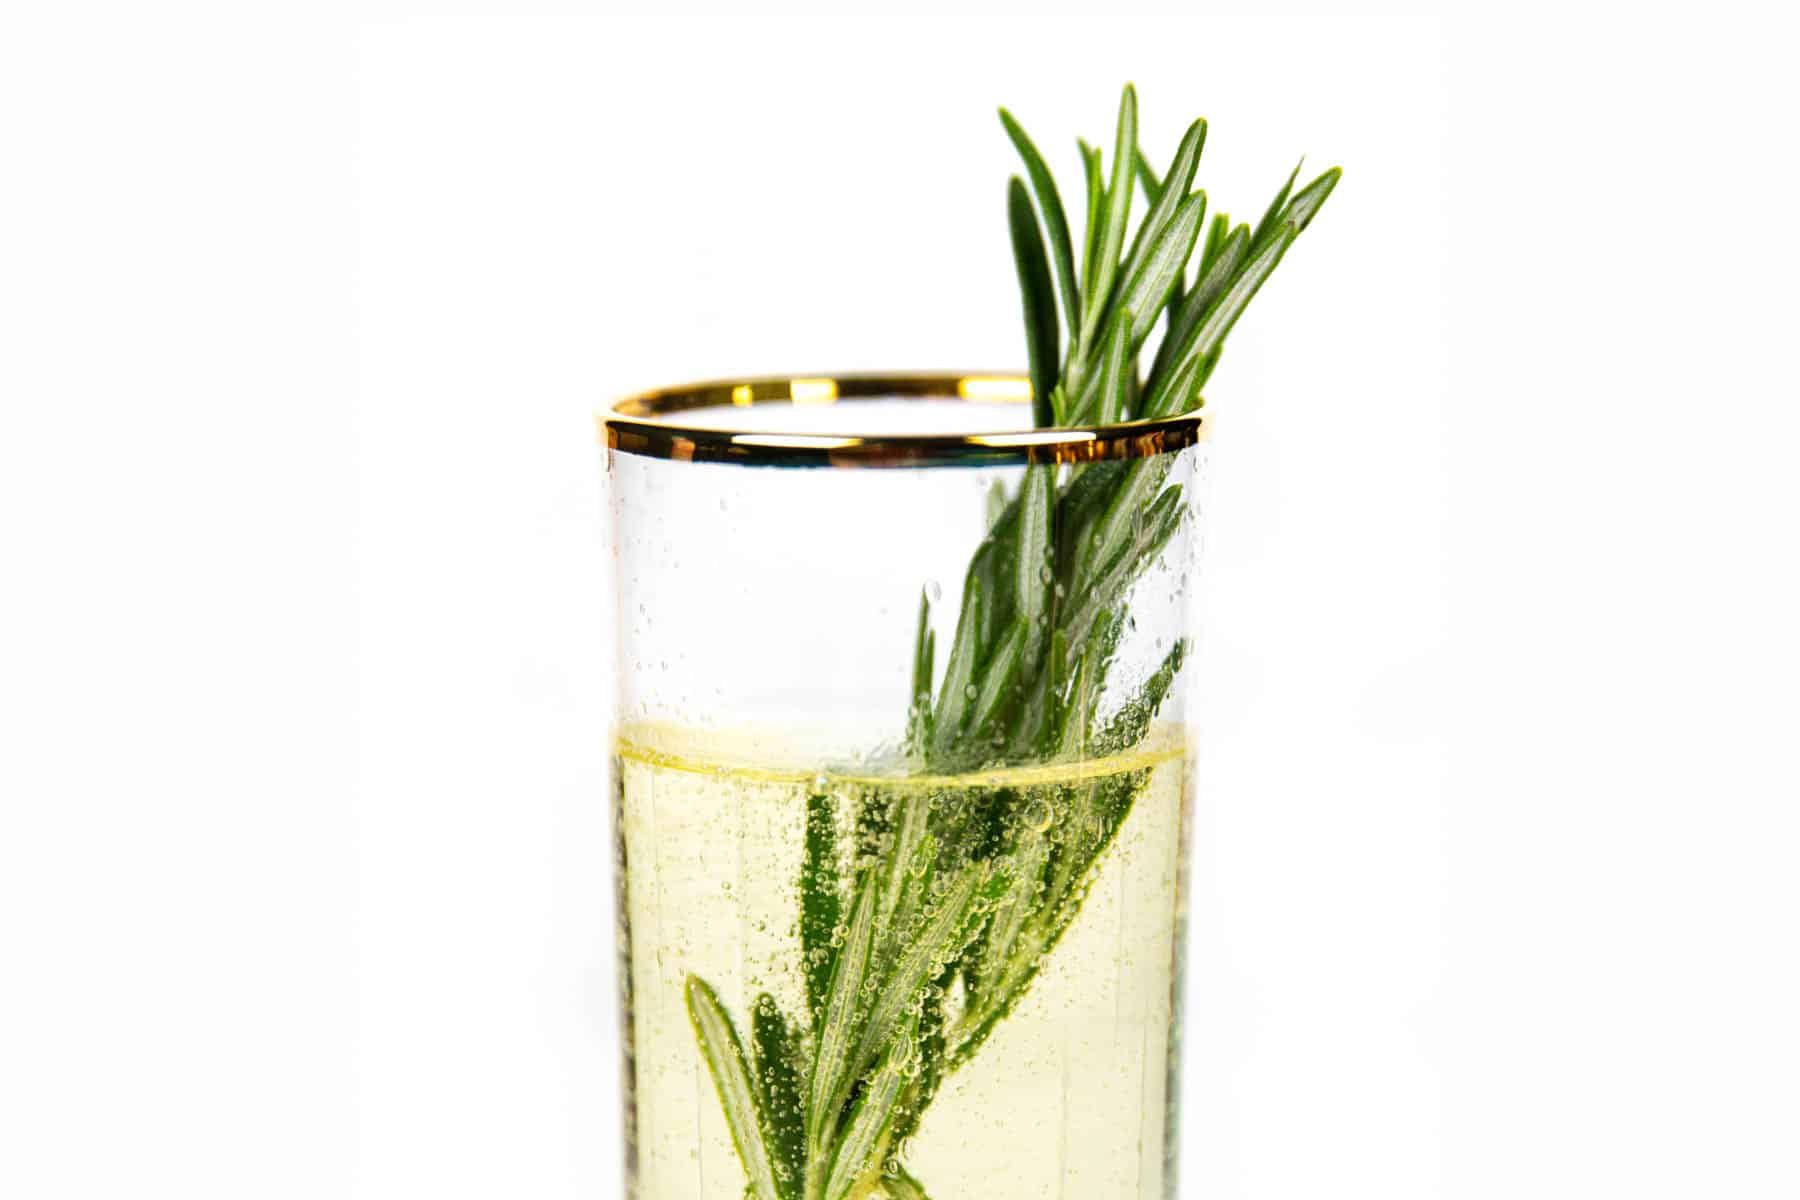 Rosemary sprigs stick out of a gold-rimmed glass with a bubbly cocktail inside.